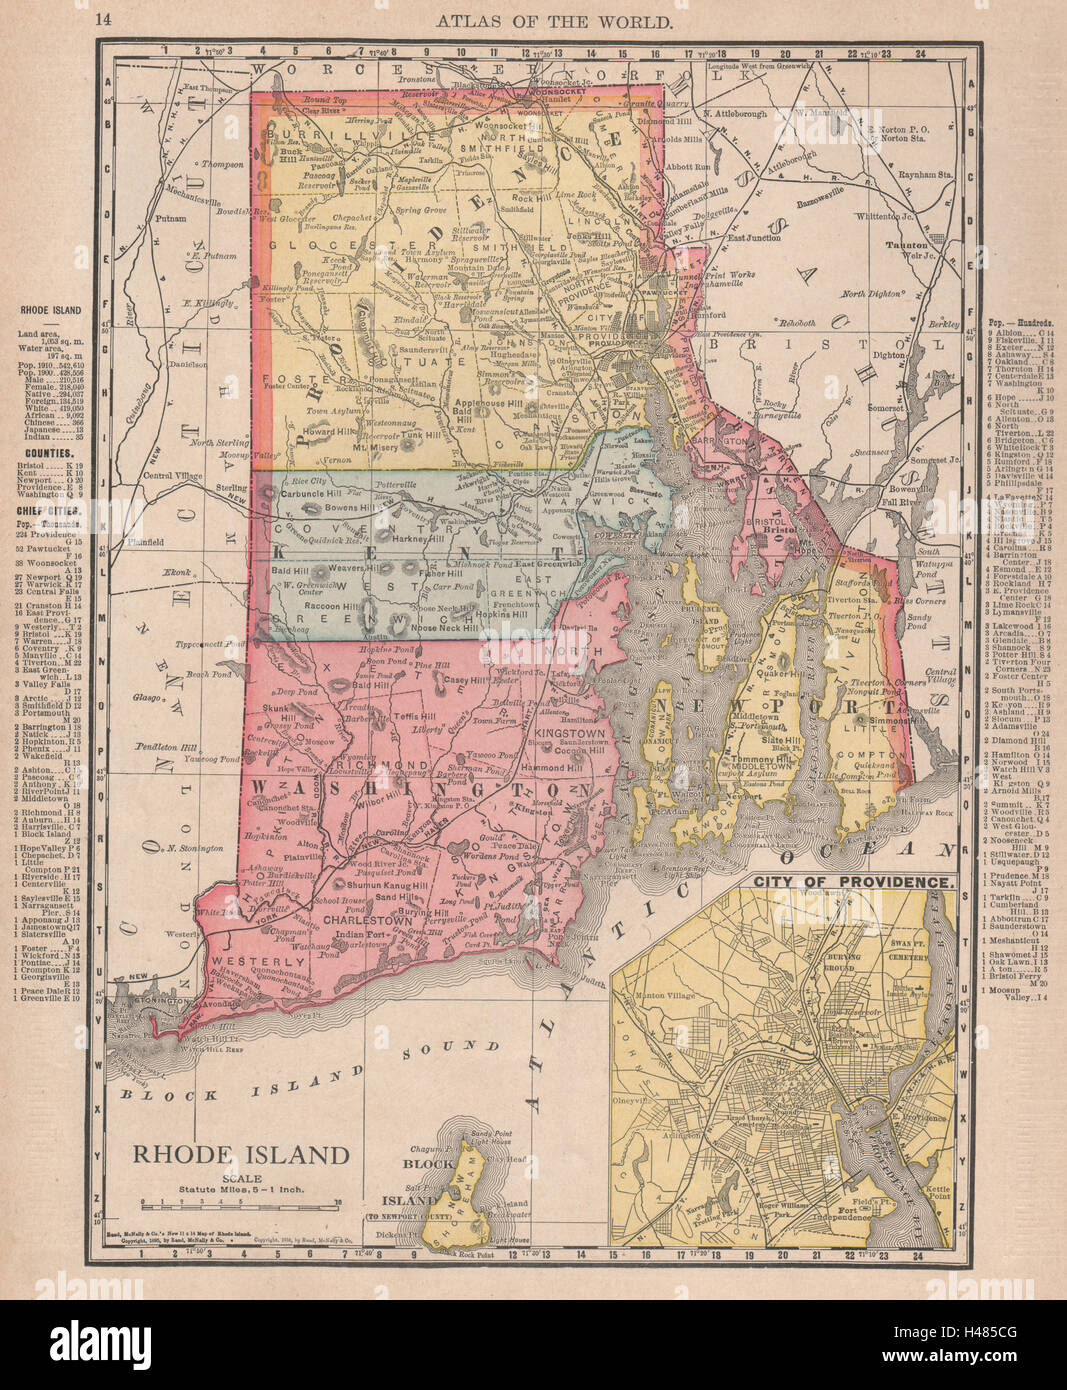 Rhode Island state map showing counties. Providence inset. RAND MCNALLY 1912 Stock Photo